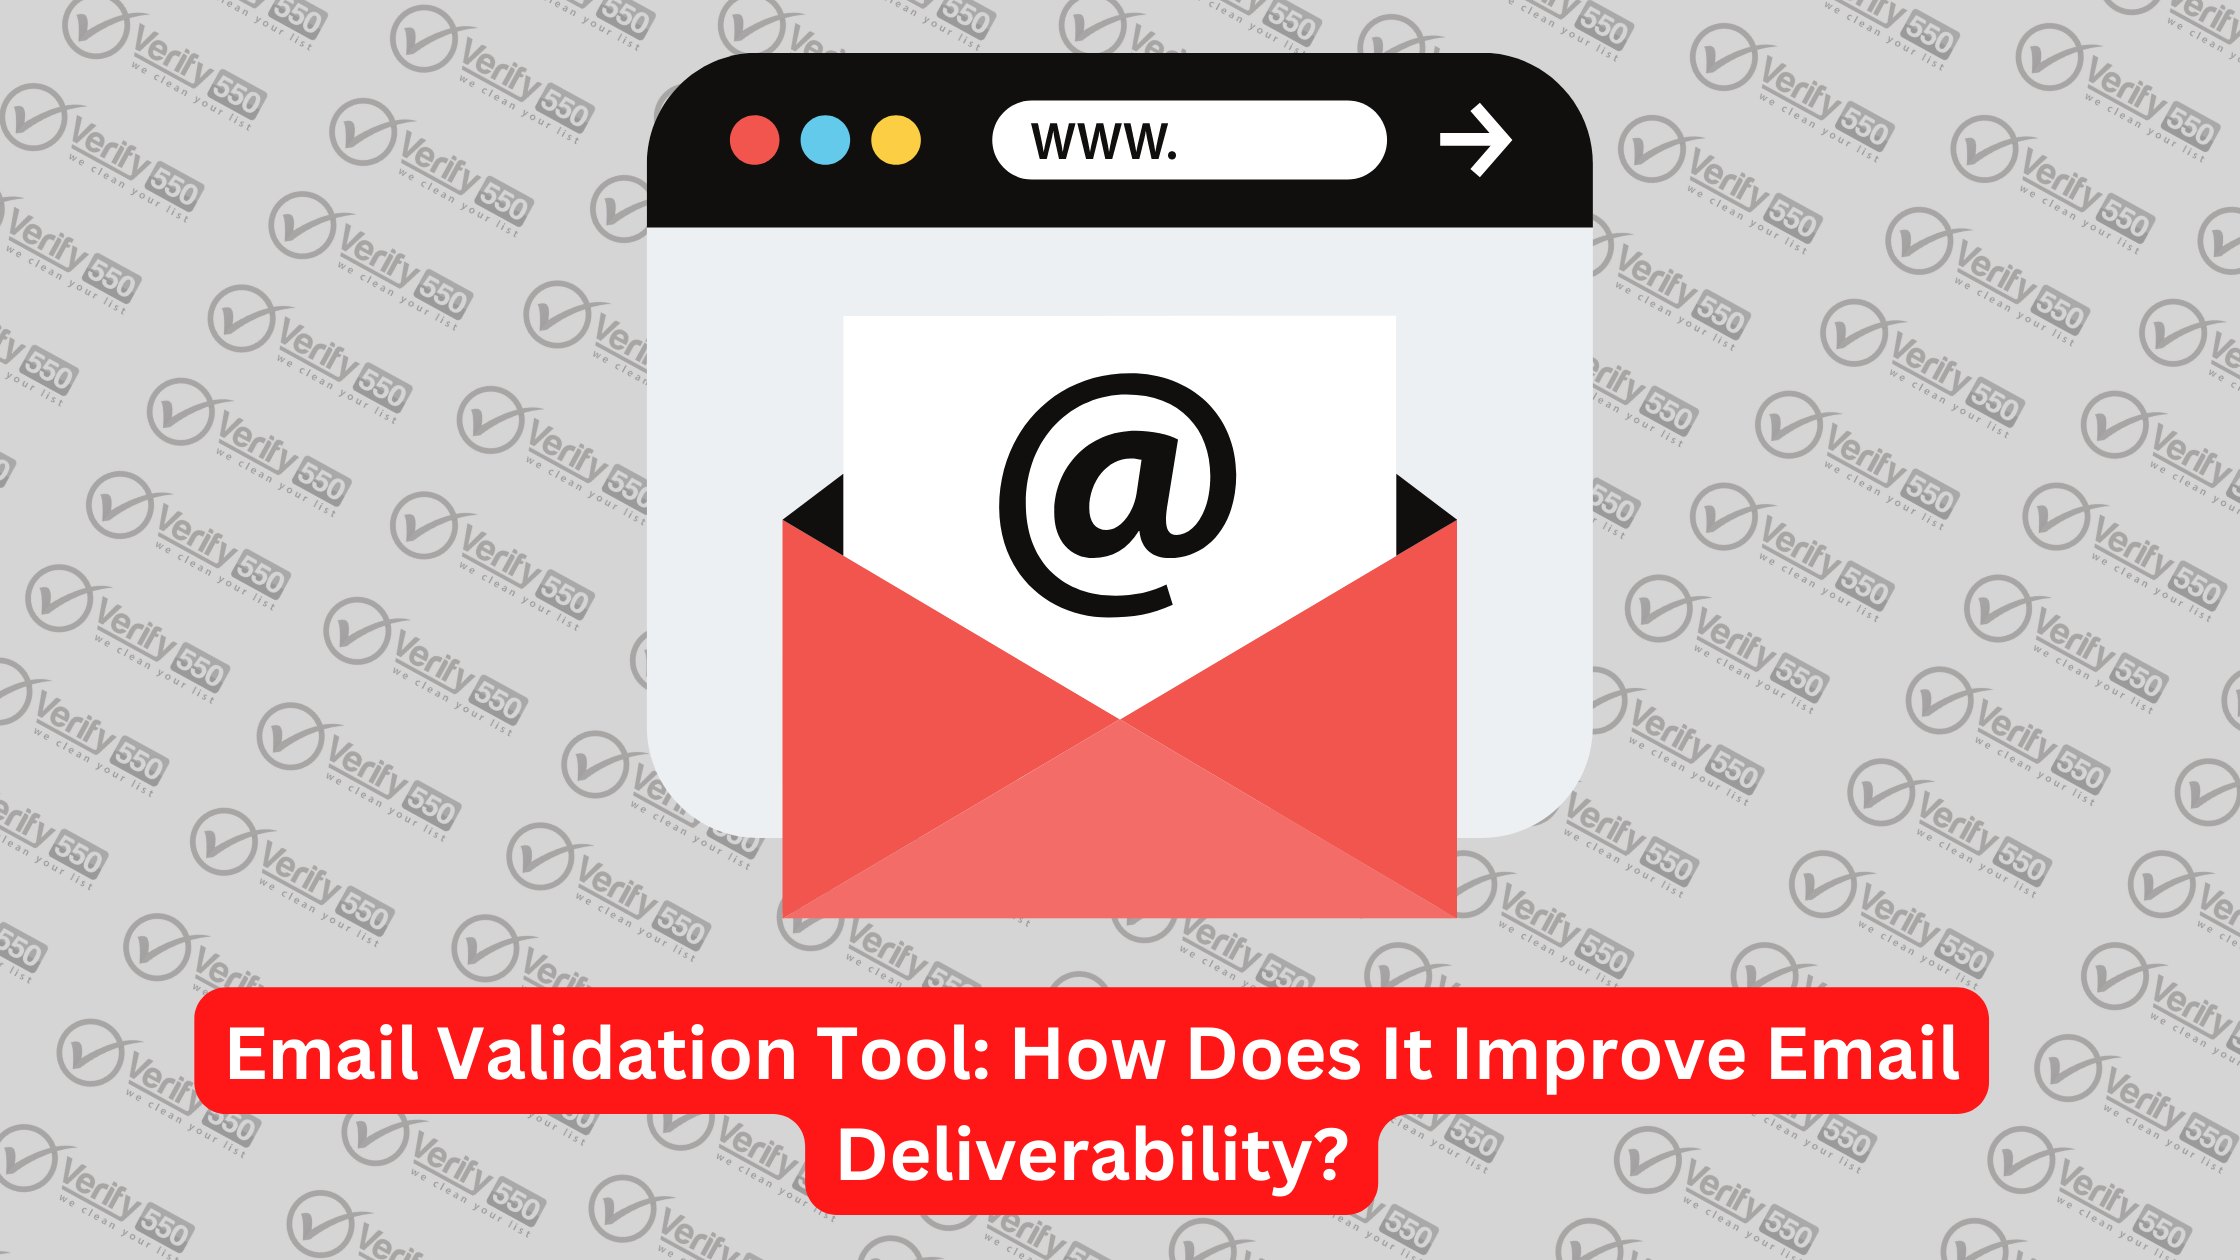 email validation service